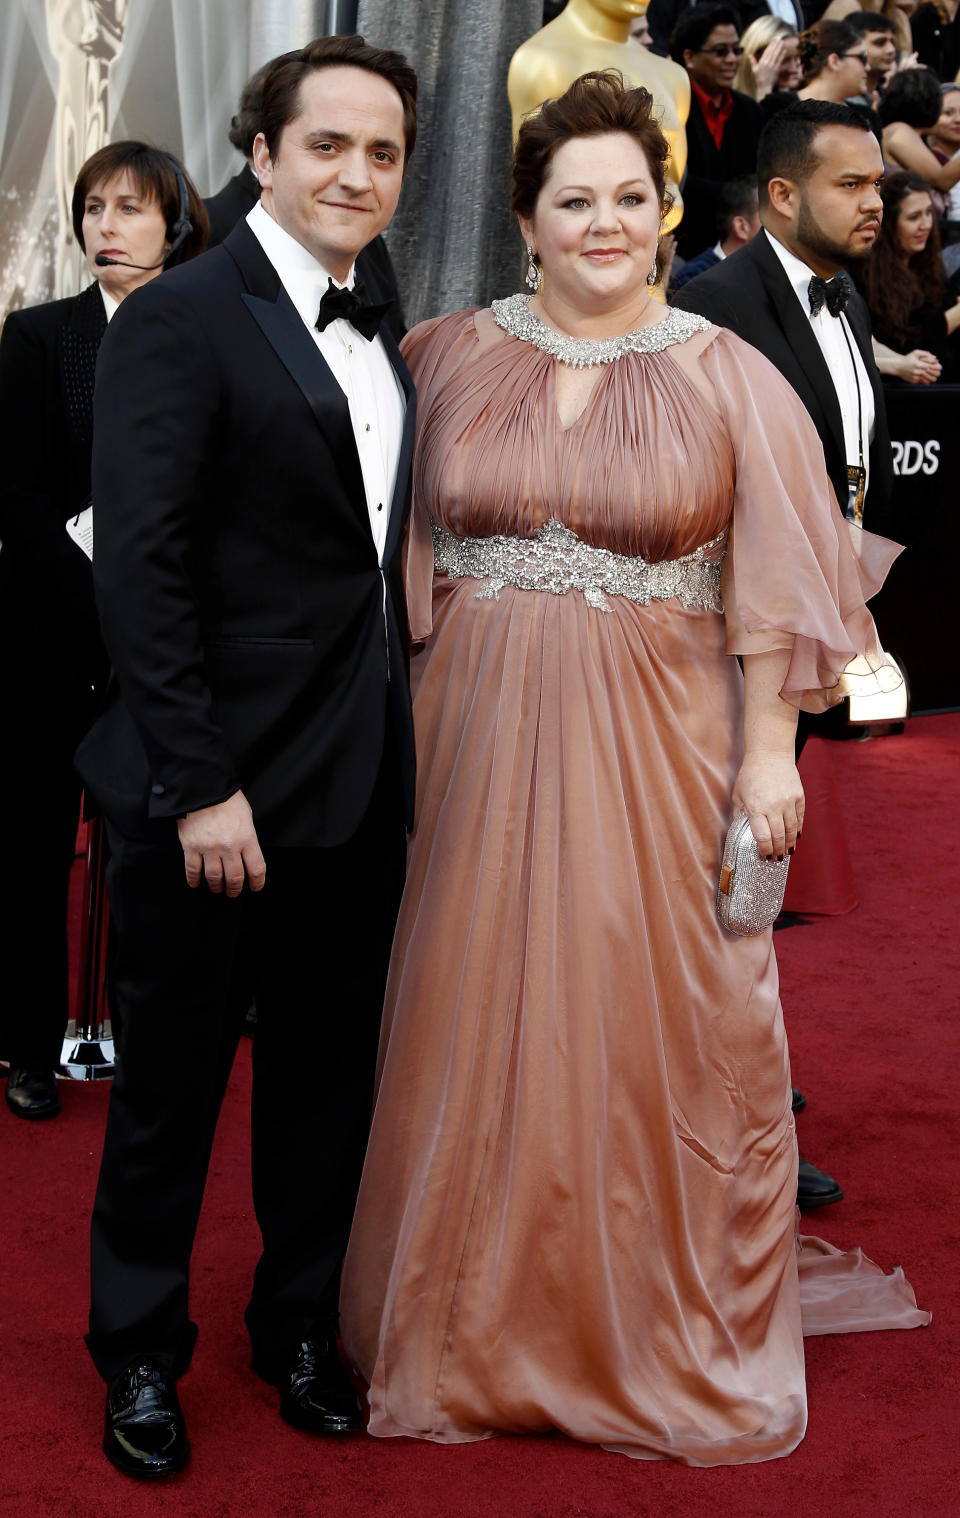 Ben Falcone, left, and Melissa McCarthy arrive before the 84th Academy Awards on Sunday, Feb. 26, 2012, in the Hollywood section of Los Angeles. (AP Photo/Matt Sayles)